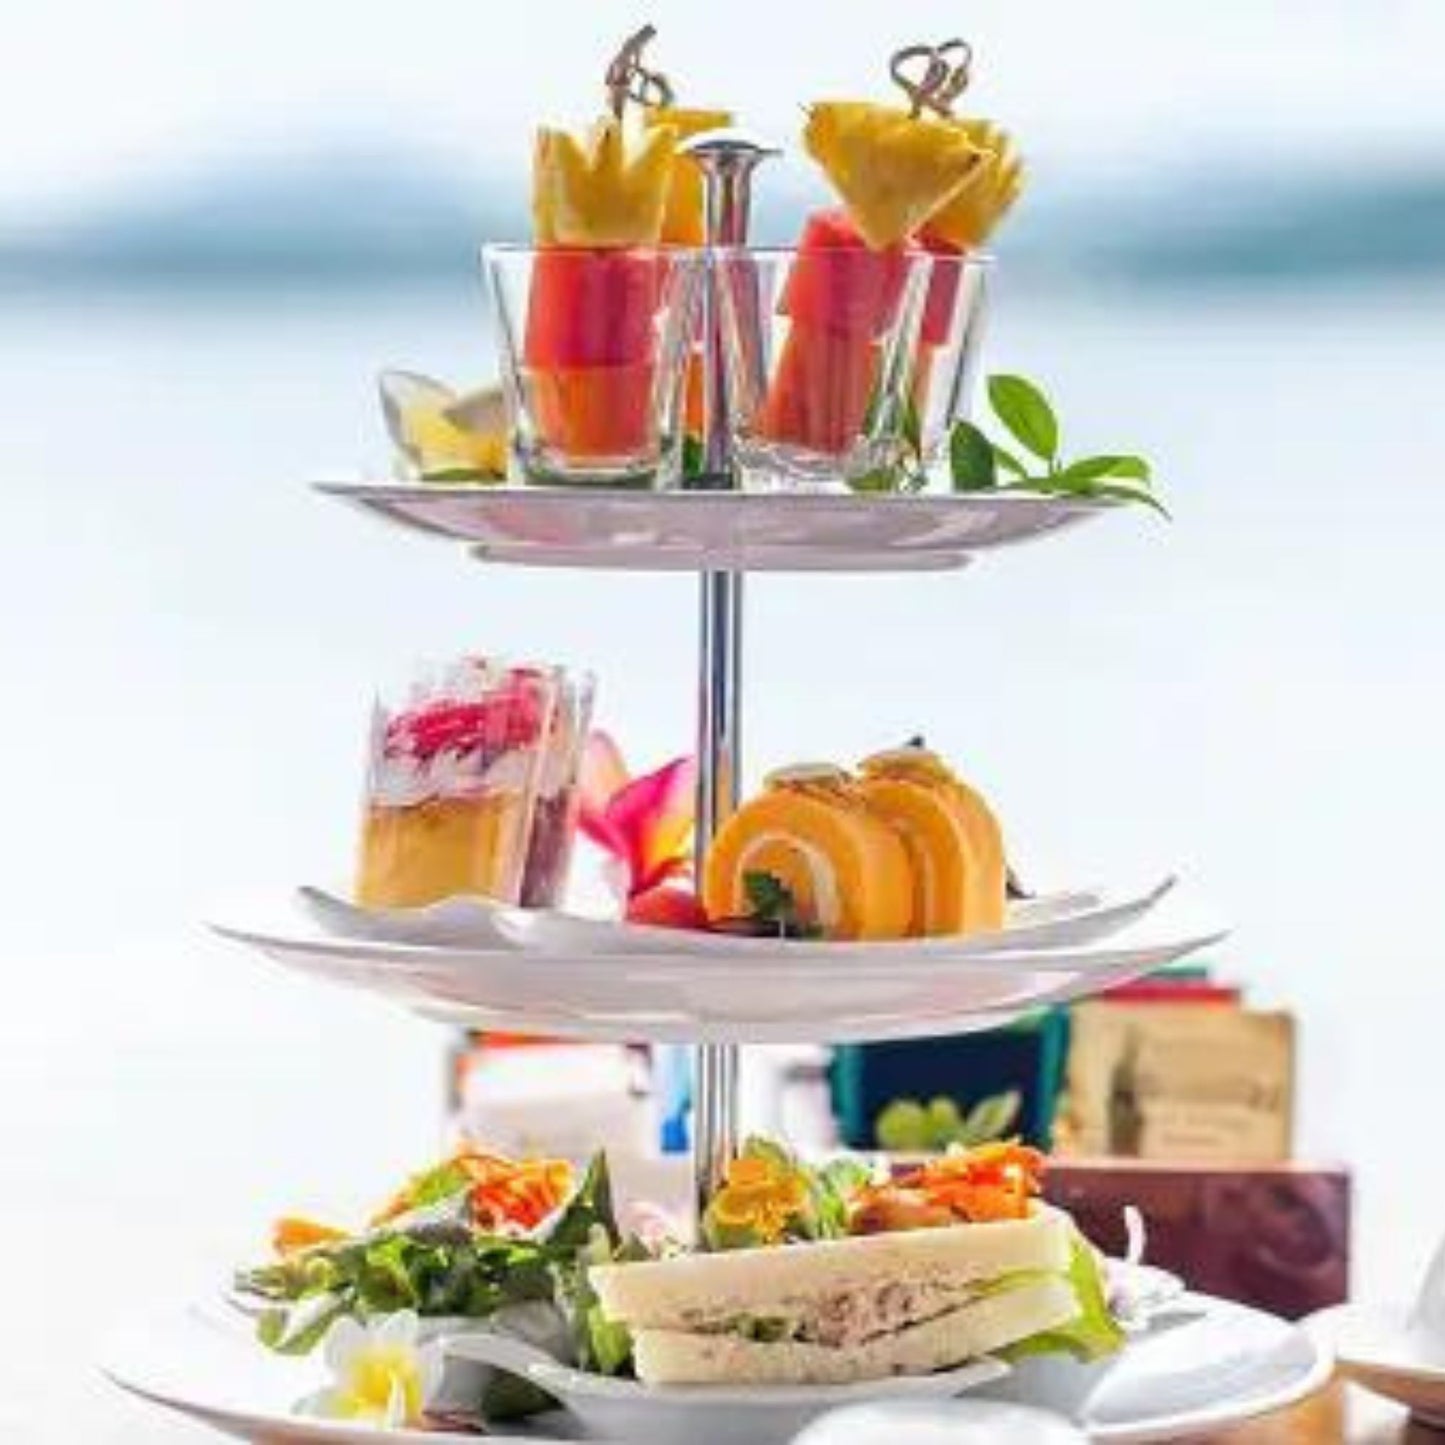 Unlimited High Tea Buffet for 1 or 2 people at Hotel Sanora (on Sunday afternoons)